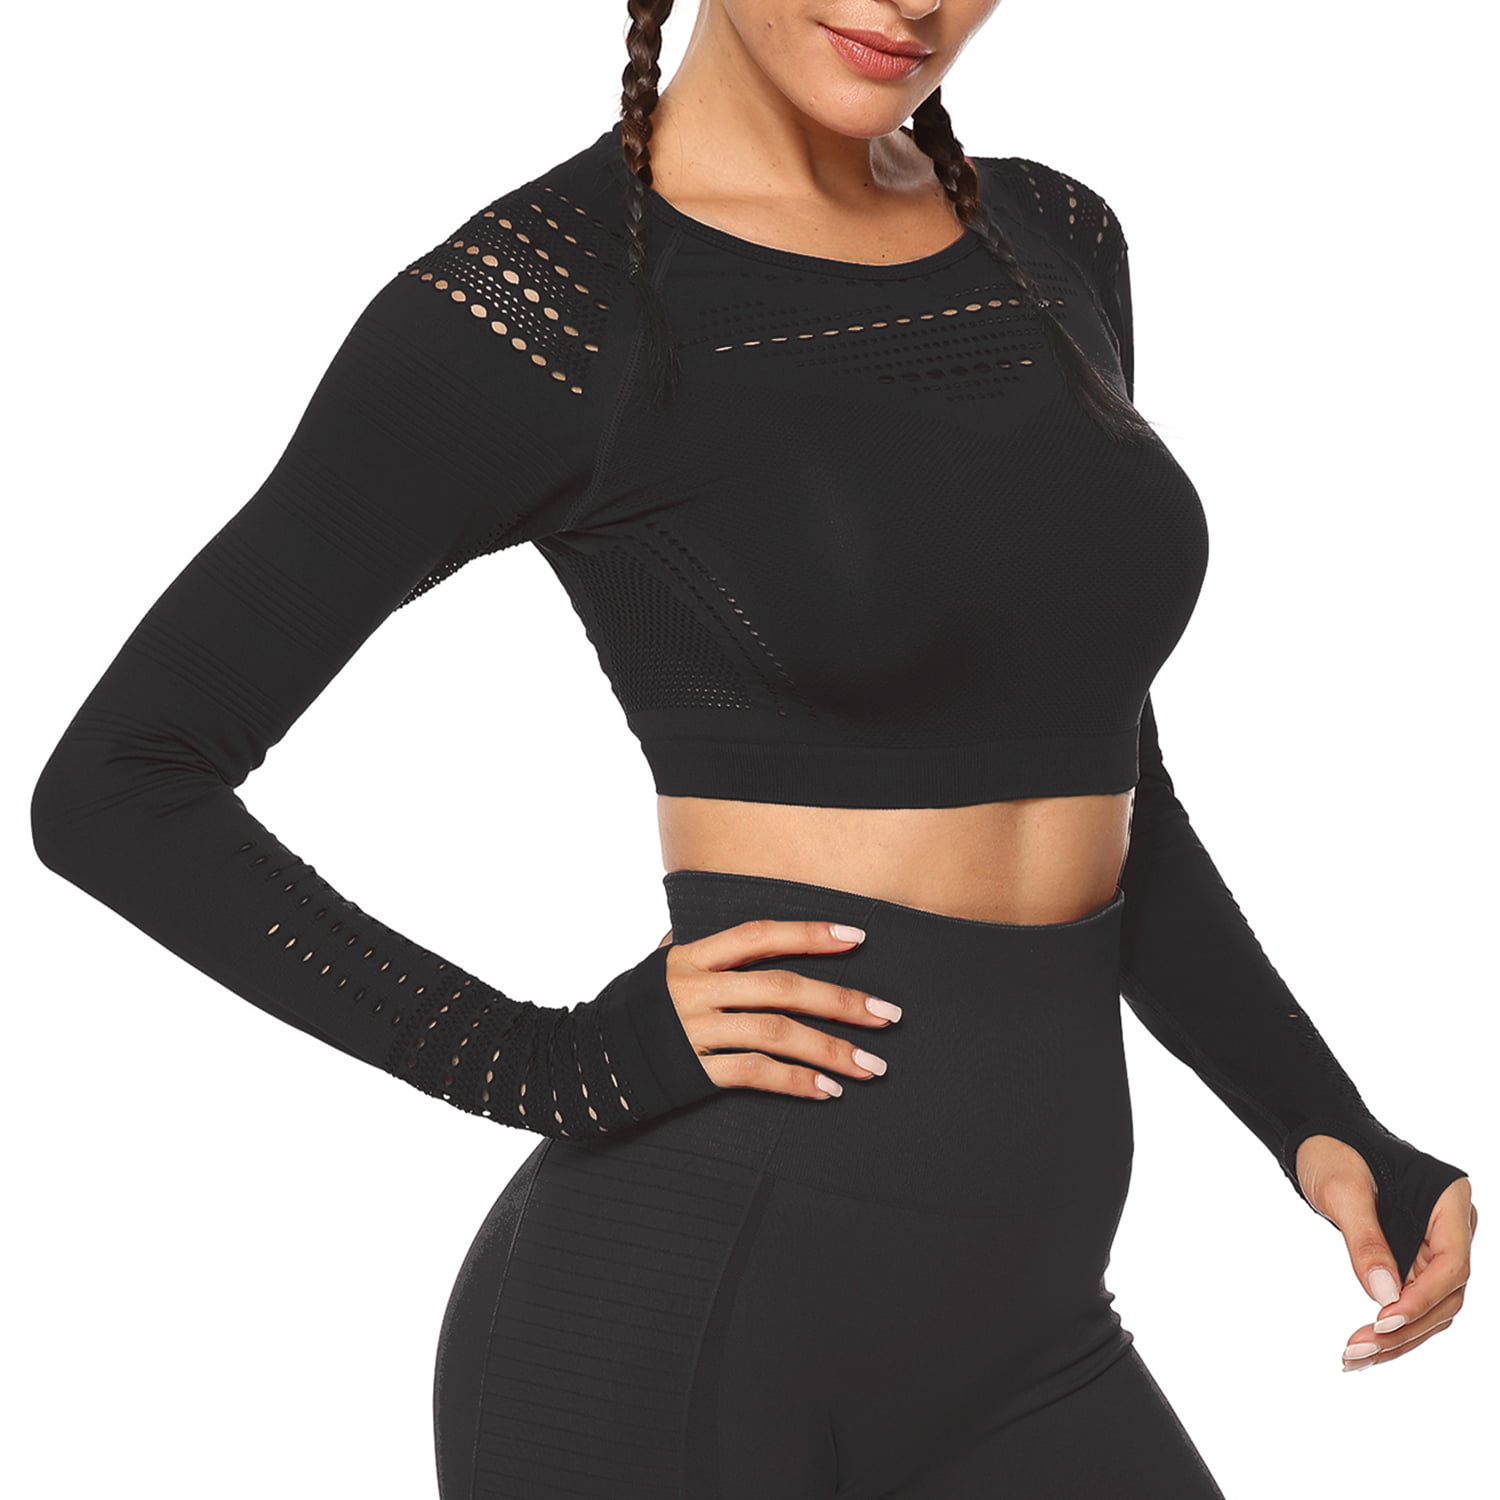 Bestisun Long Sleeve Workout Shirt Cross Back Cute Cropped Running Workout Athletic Tops for Women Thumb Hole 